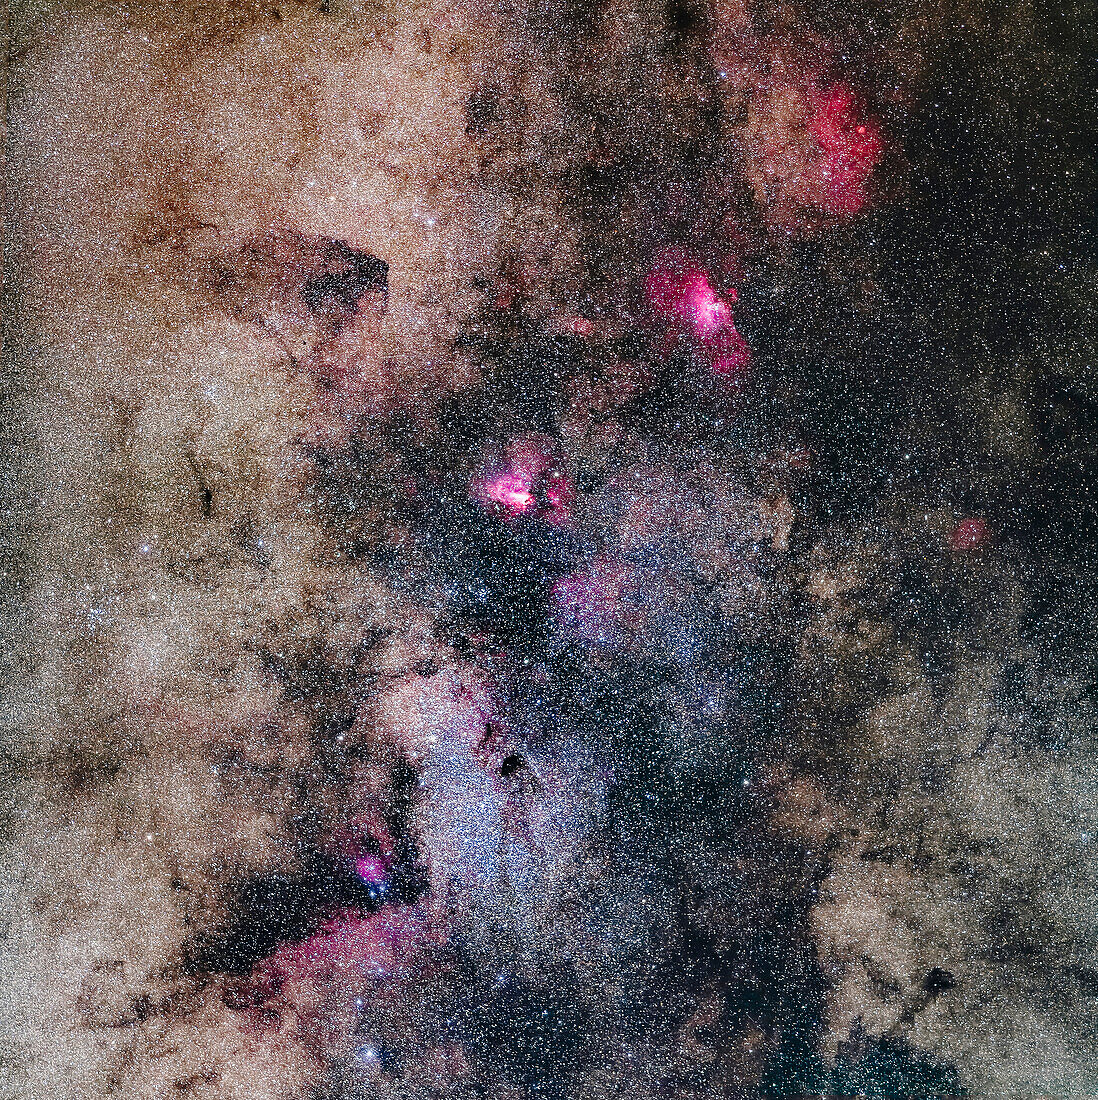 A mosaic of the rich region in Sagittarius and southern Serpens, from the Small Sagittarius Starcloud (Messier 24) at bottom to Messier 16, the Eagle Nebula, at top, with a fainter nebula above it around the cluster NGC 6604. At centre is the Swan or Omega Nebula, Messier 17. The dark nebula below centre is Barnard 92.